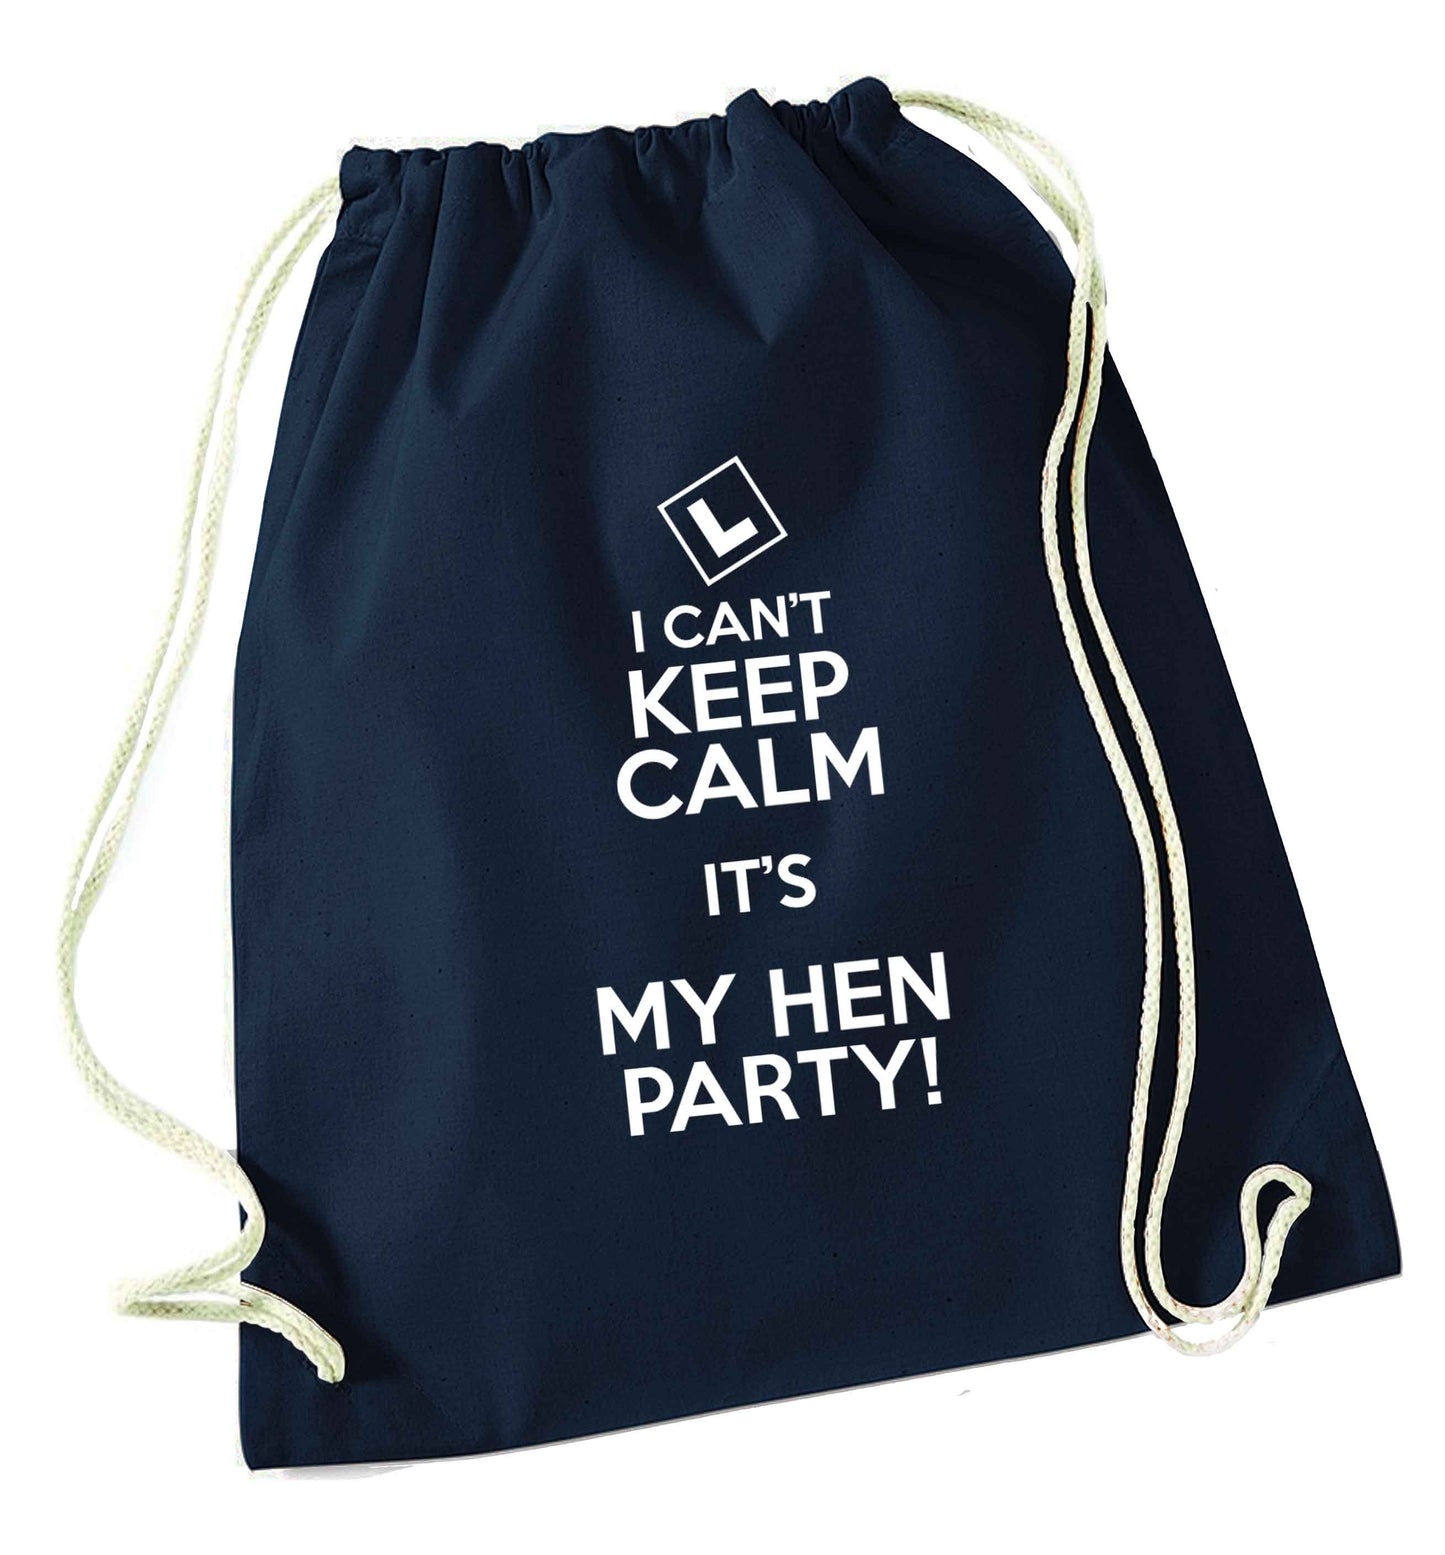 I can't keep calm it's my hen party navy drawstring bag